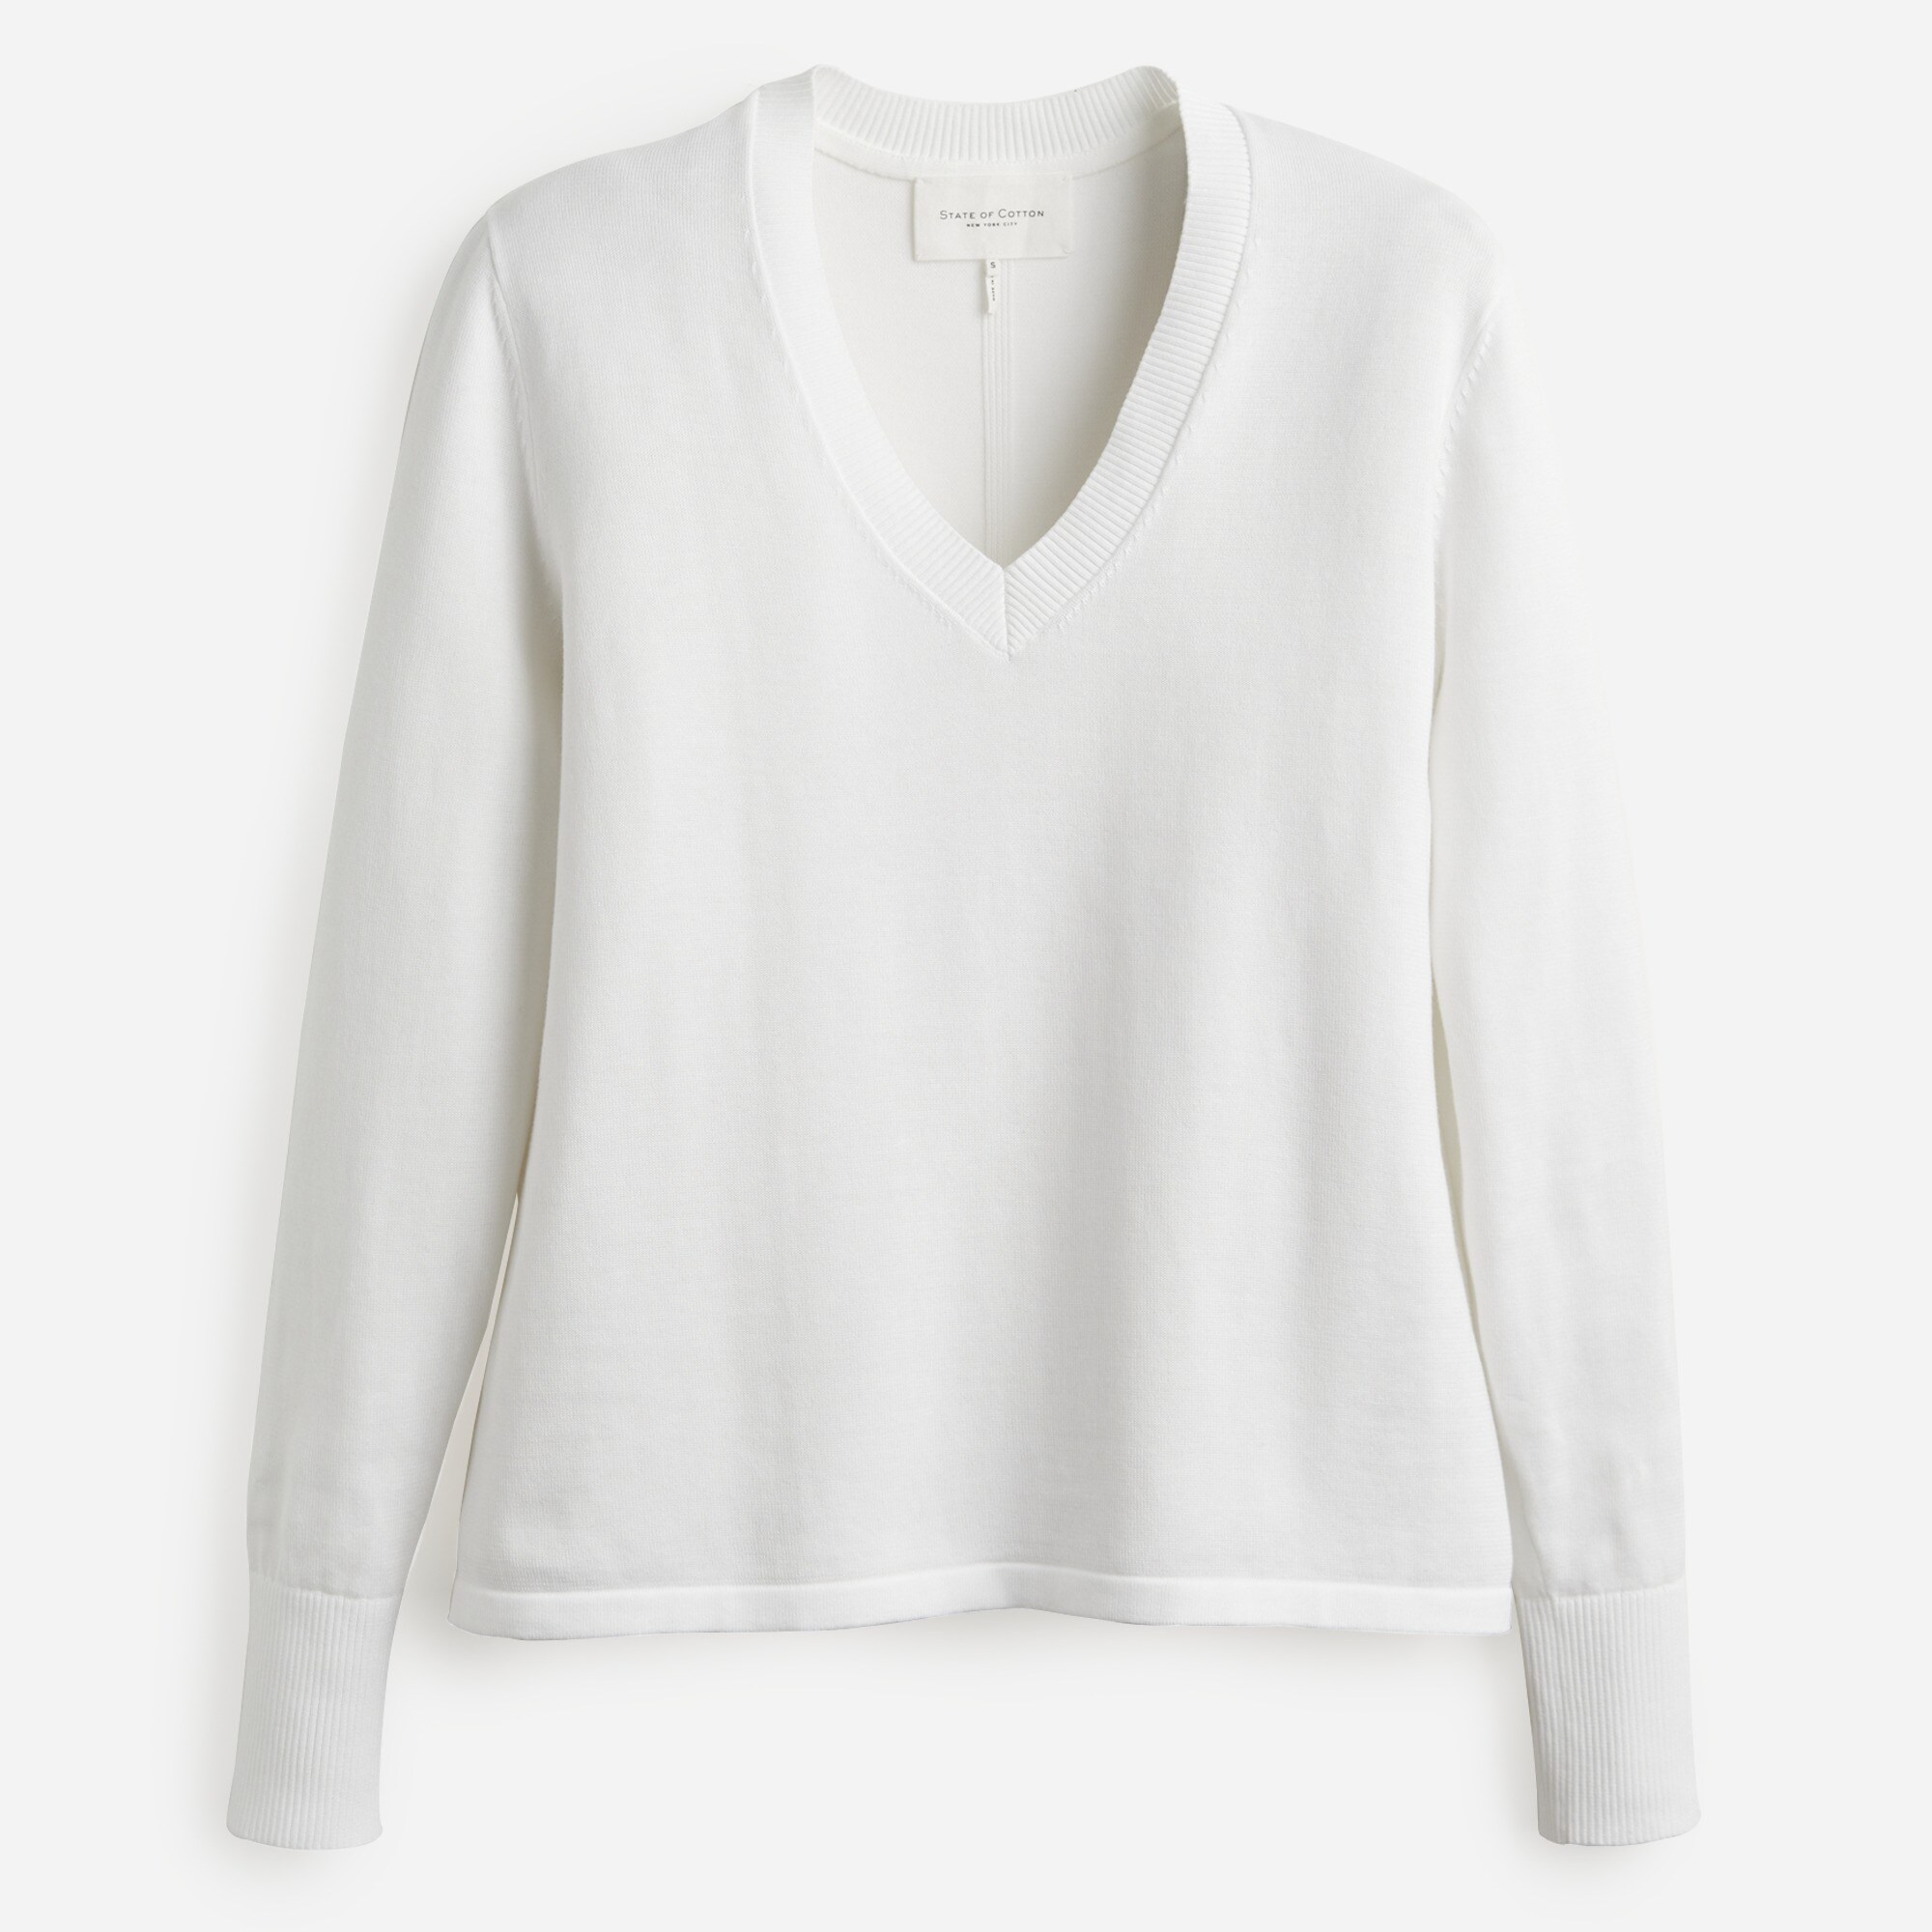  State of Cotton NYC Elle V-neck sweater